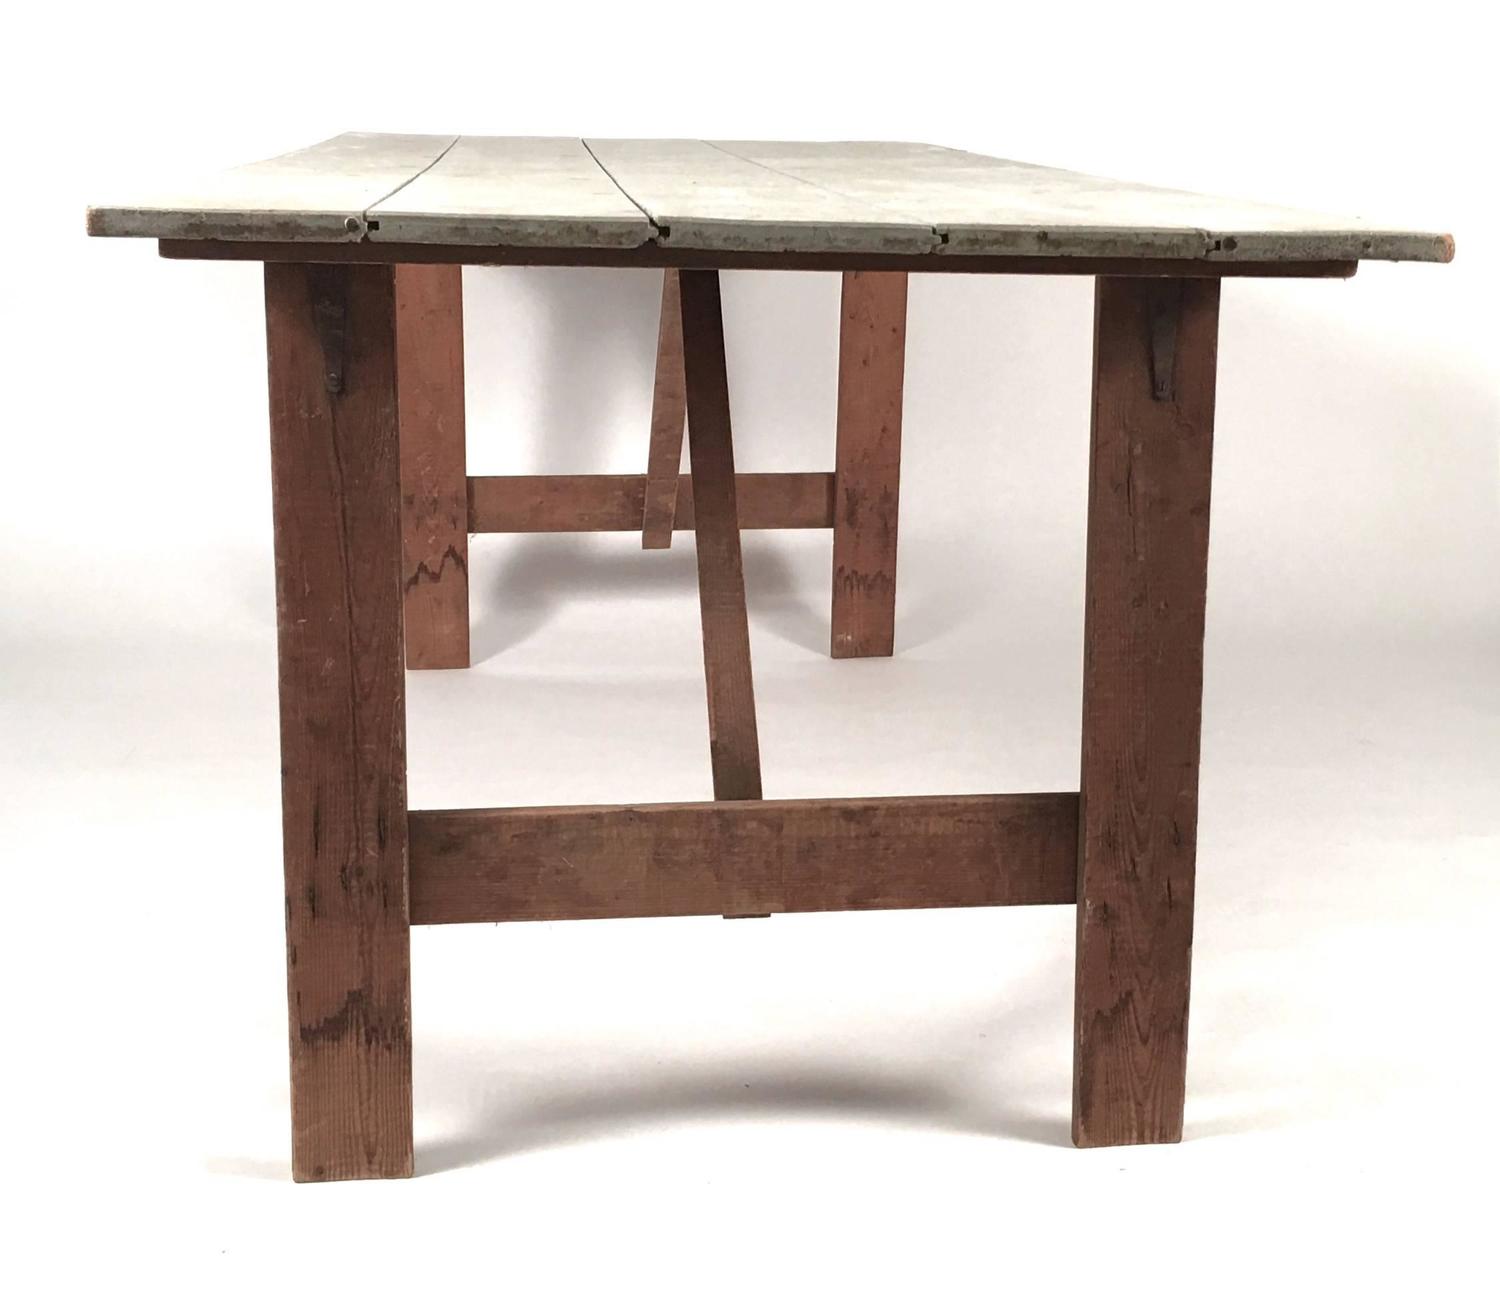 Country Folding Clam Bake Trestle Table at 1stdibs